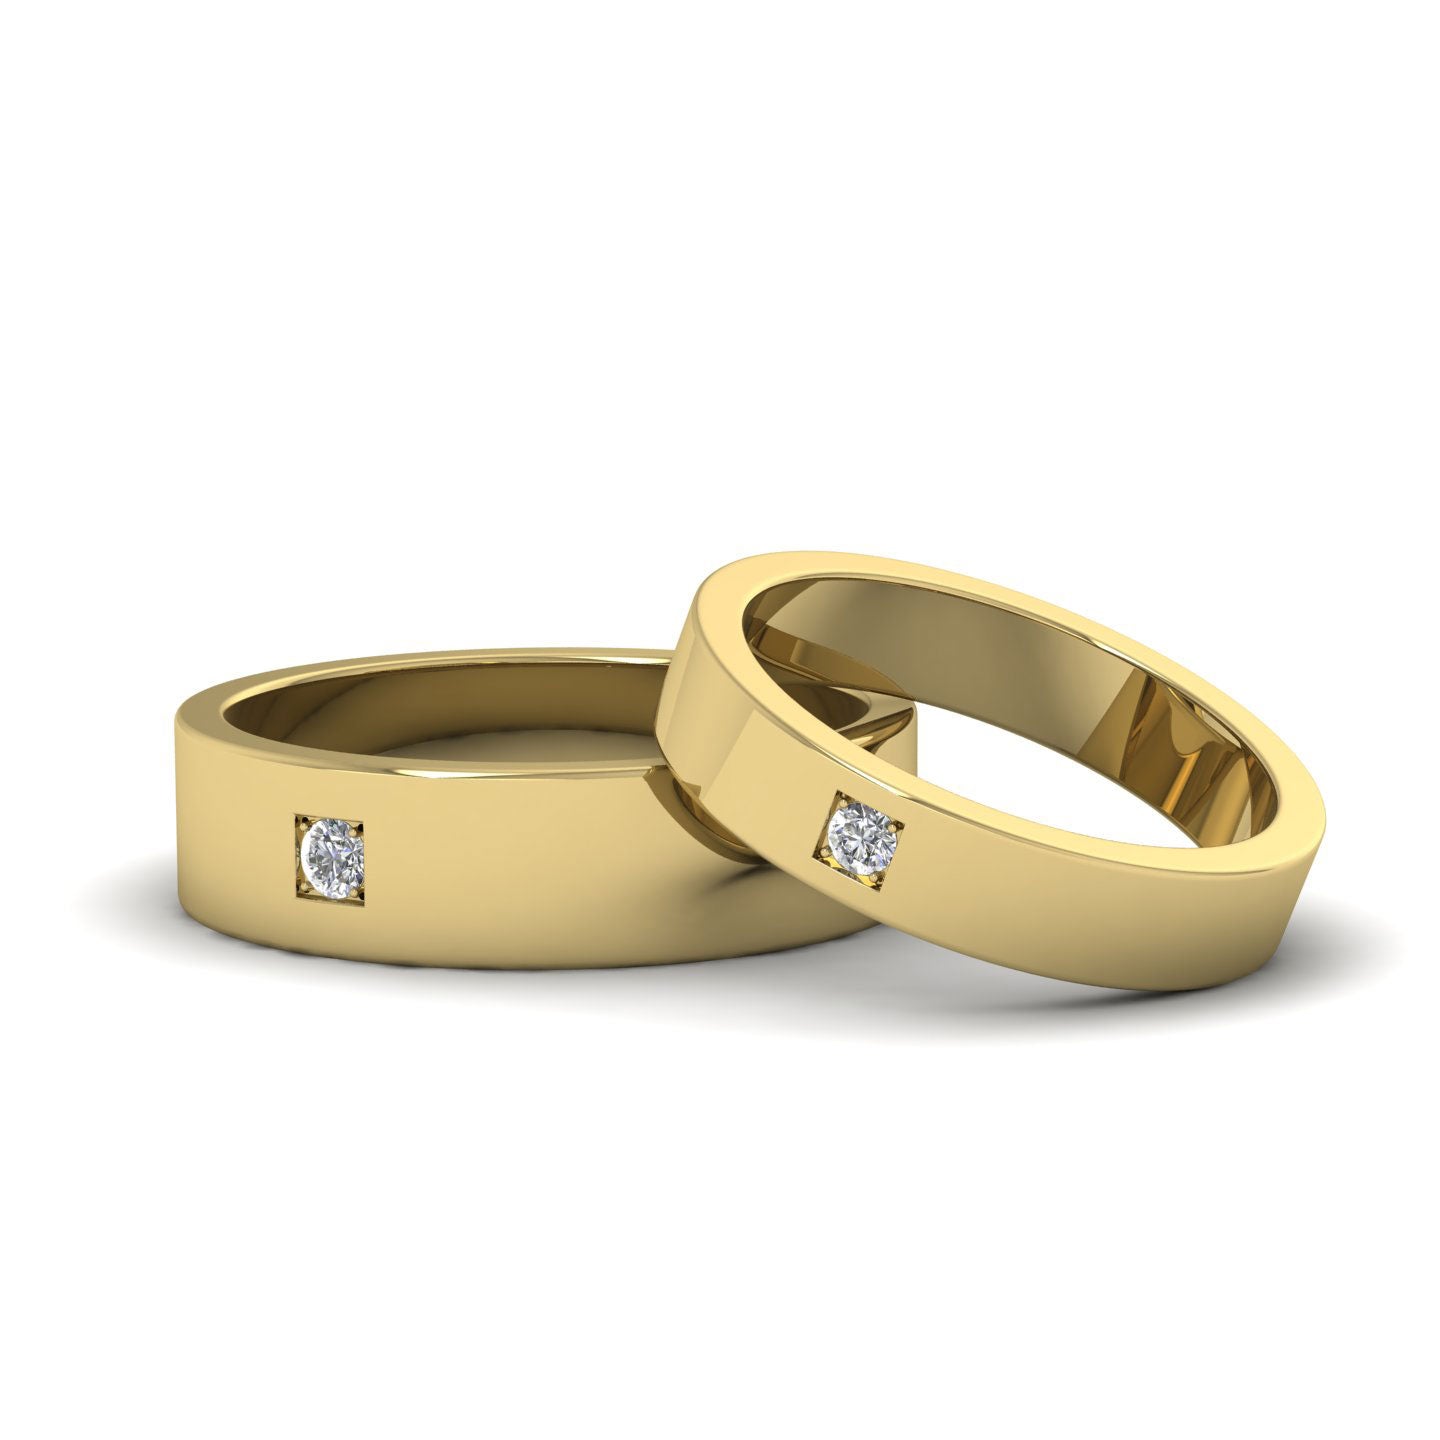 Single Diamond With Square Setting 9ct Yellow Gold 4mm Wedding Ring